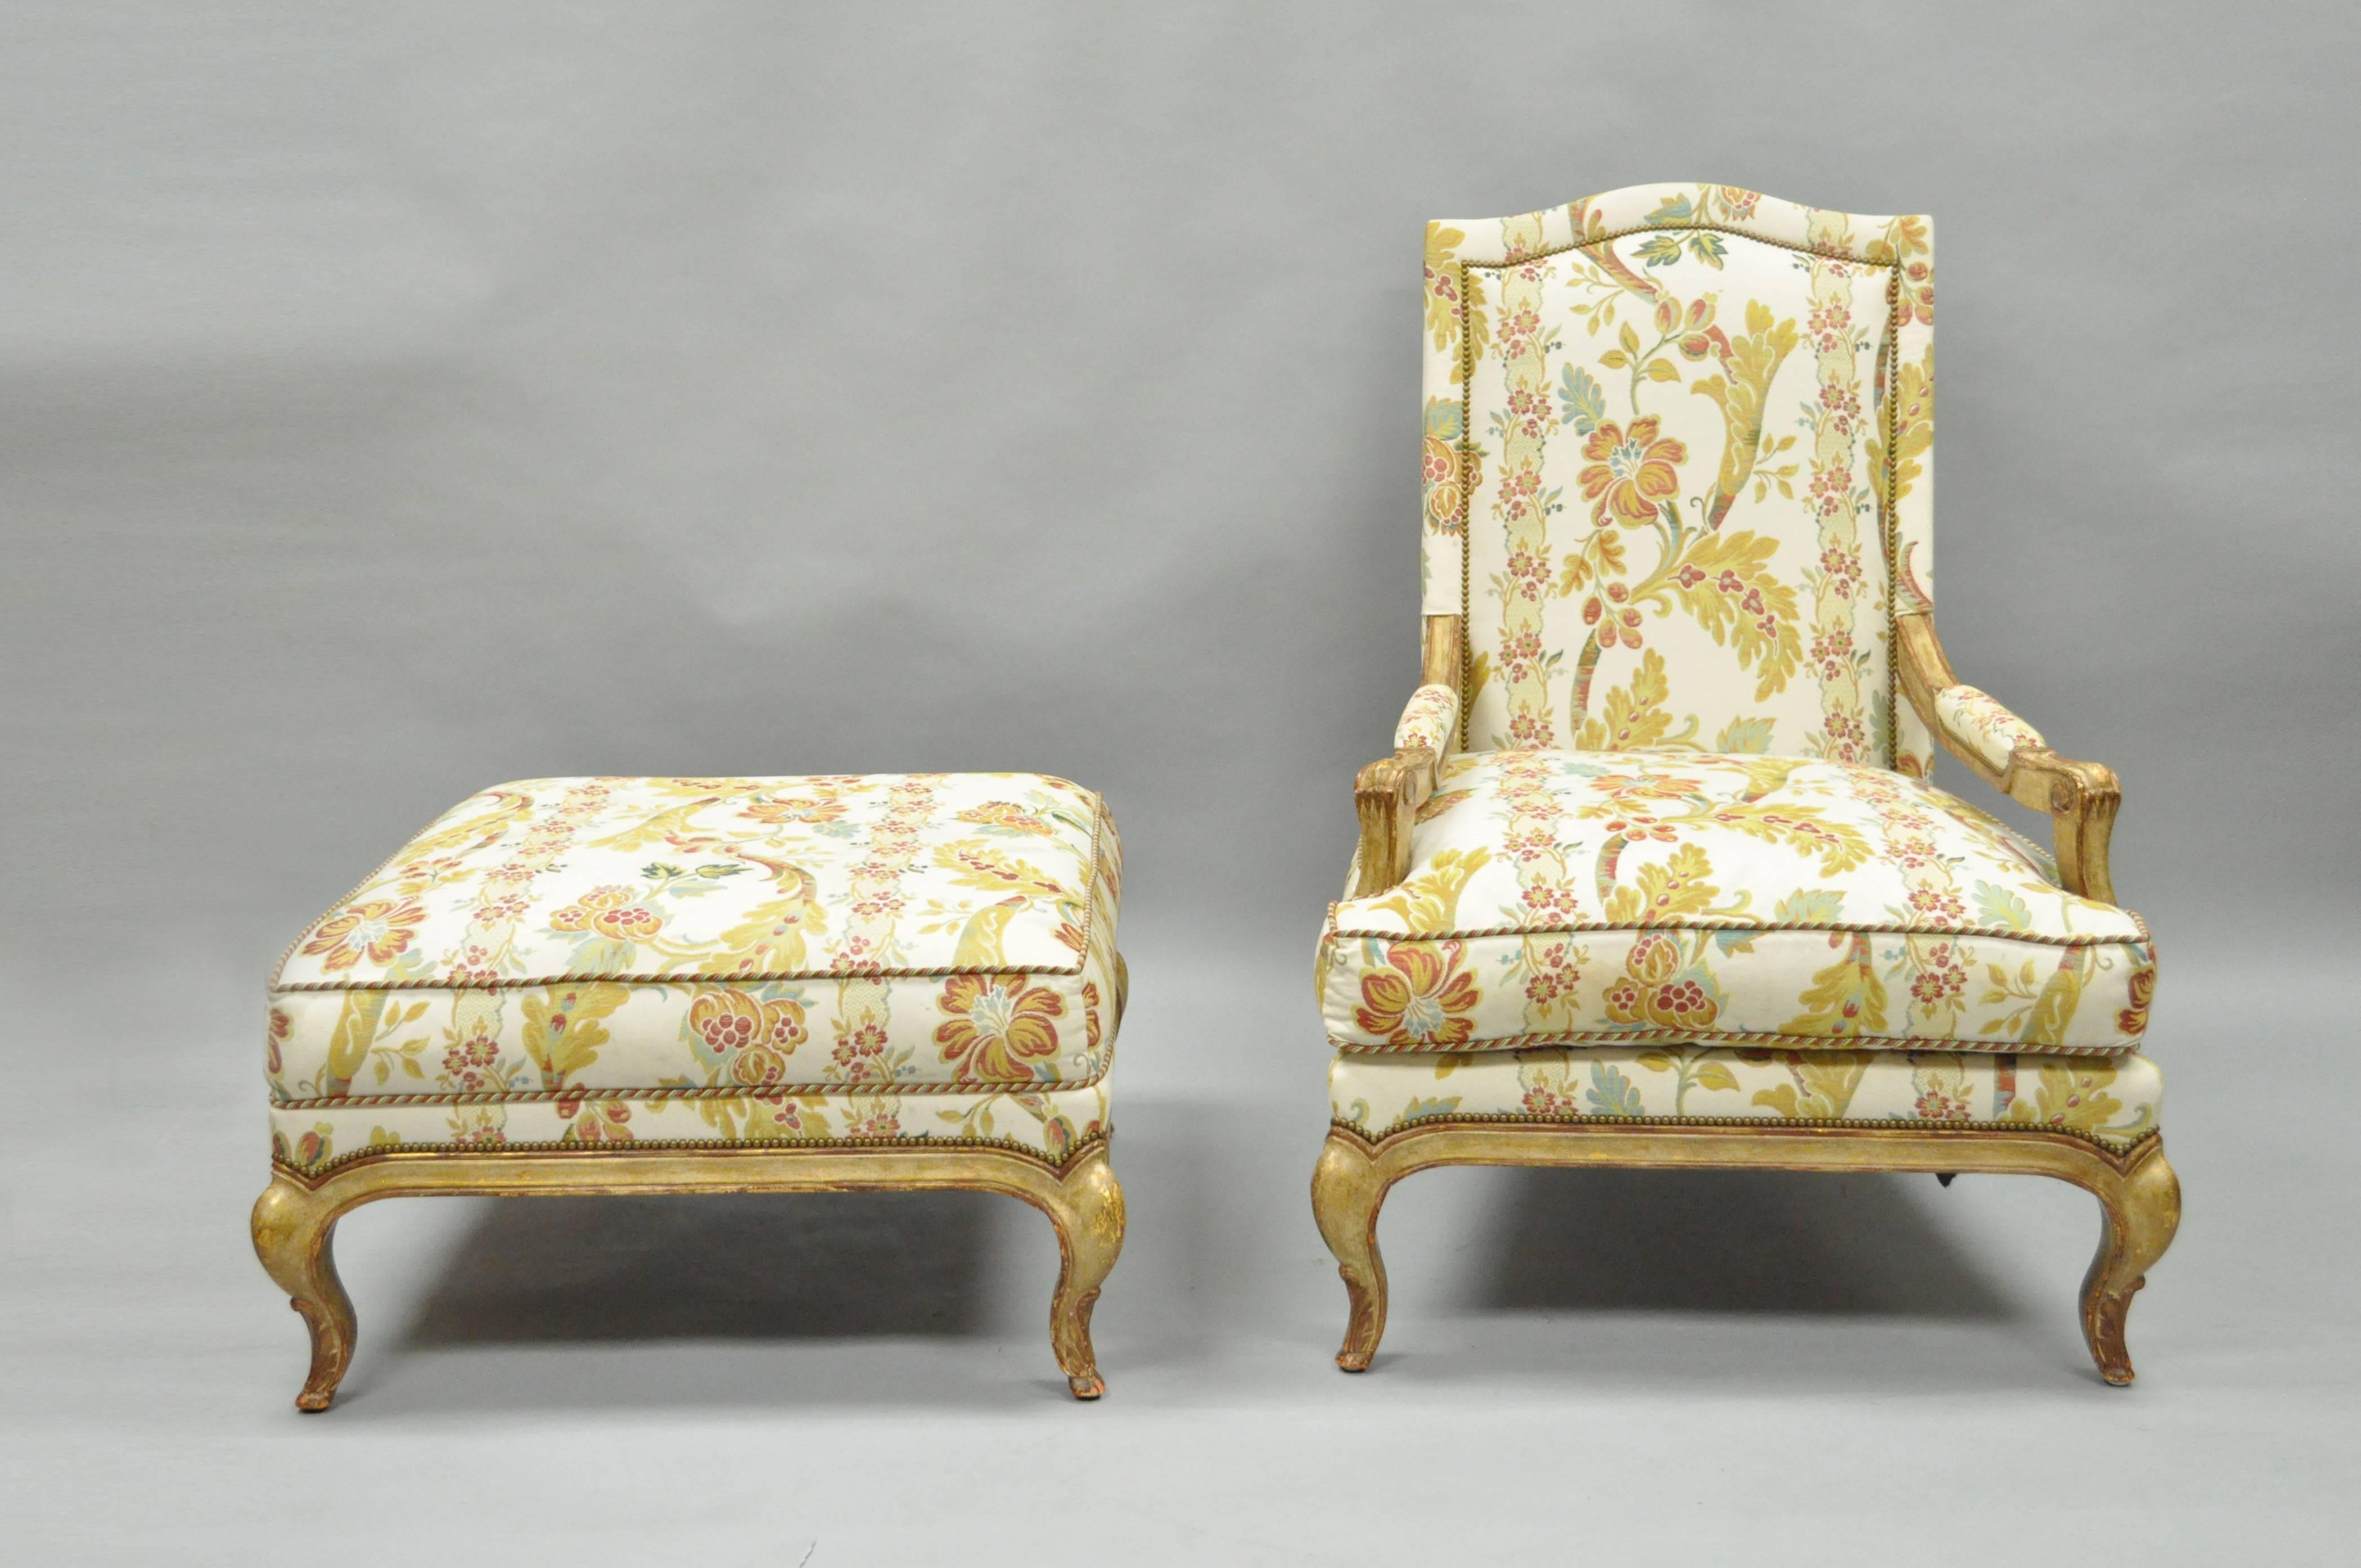 High quality country French / Louis XV style upholstered Bergere lounge chair and matching ottoman by Nancy Corzine. Chair features a stately form with a lightly carved solid wood frame, shapely cabriole legs, and beautiful gold, red, and cream